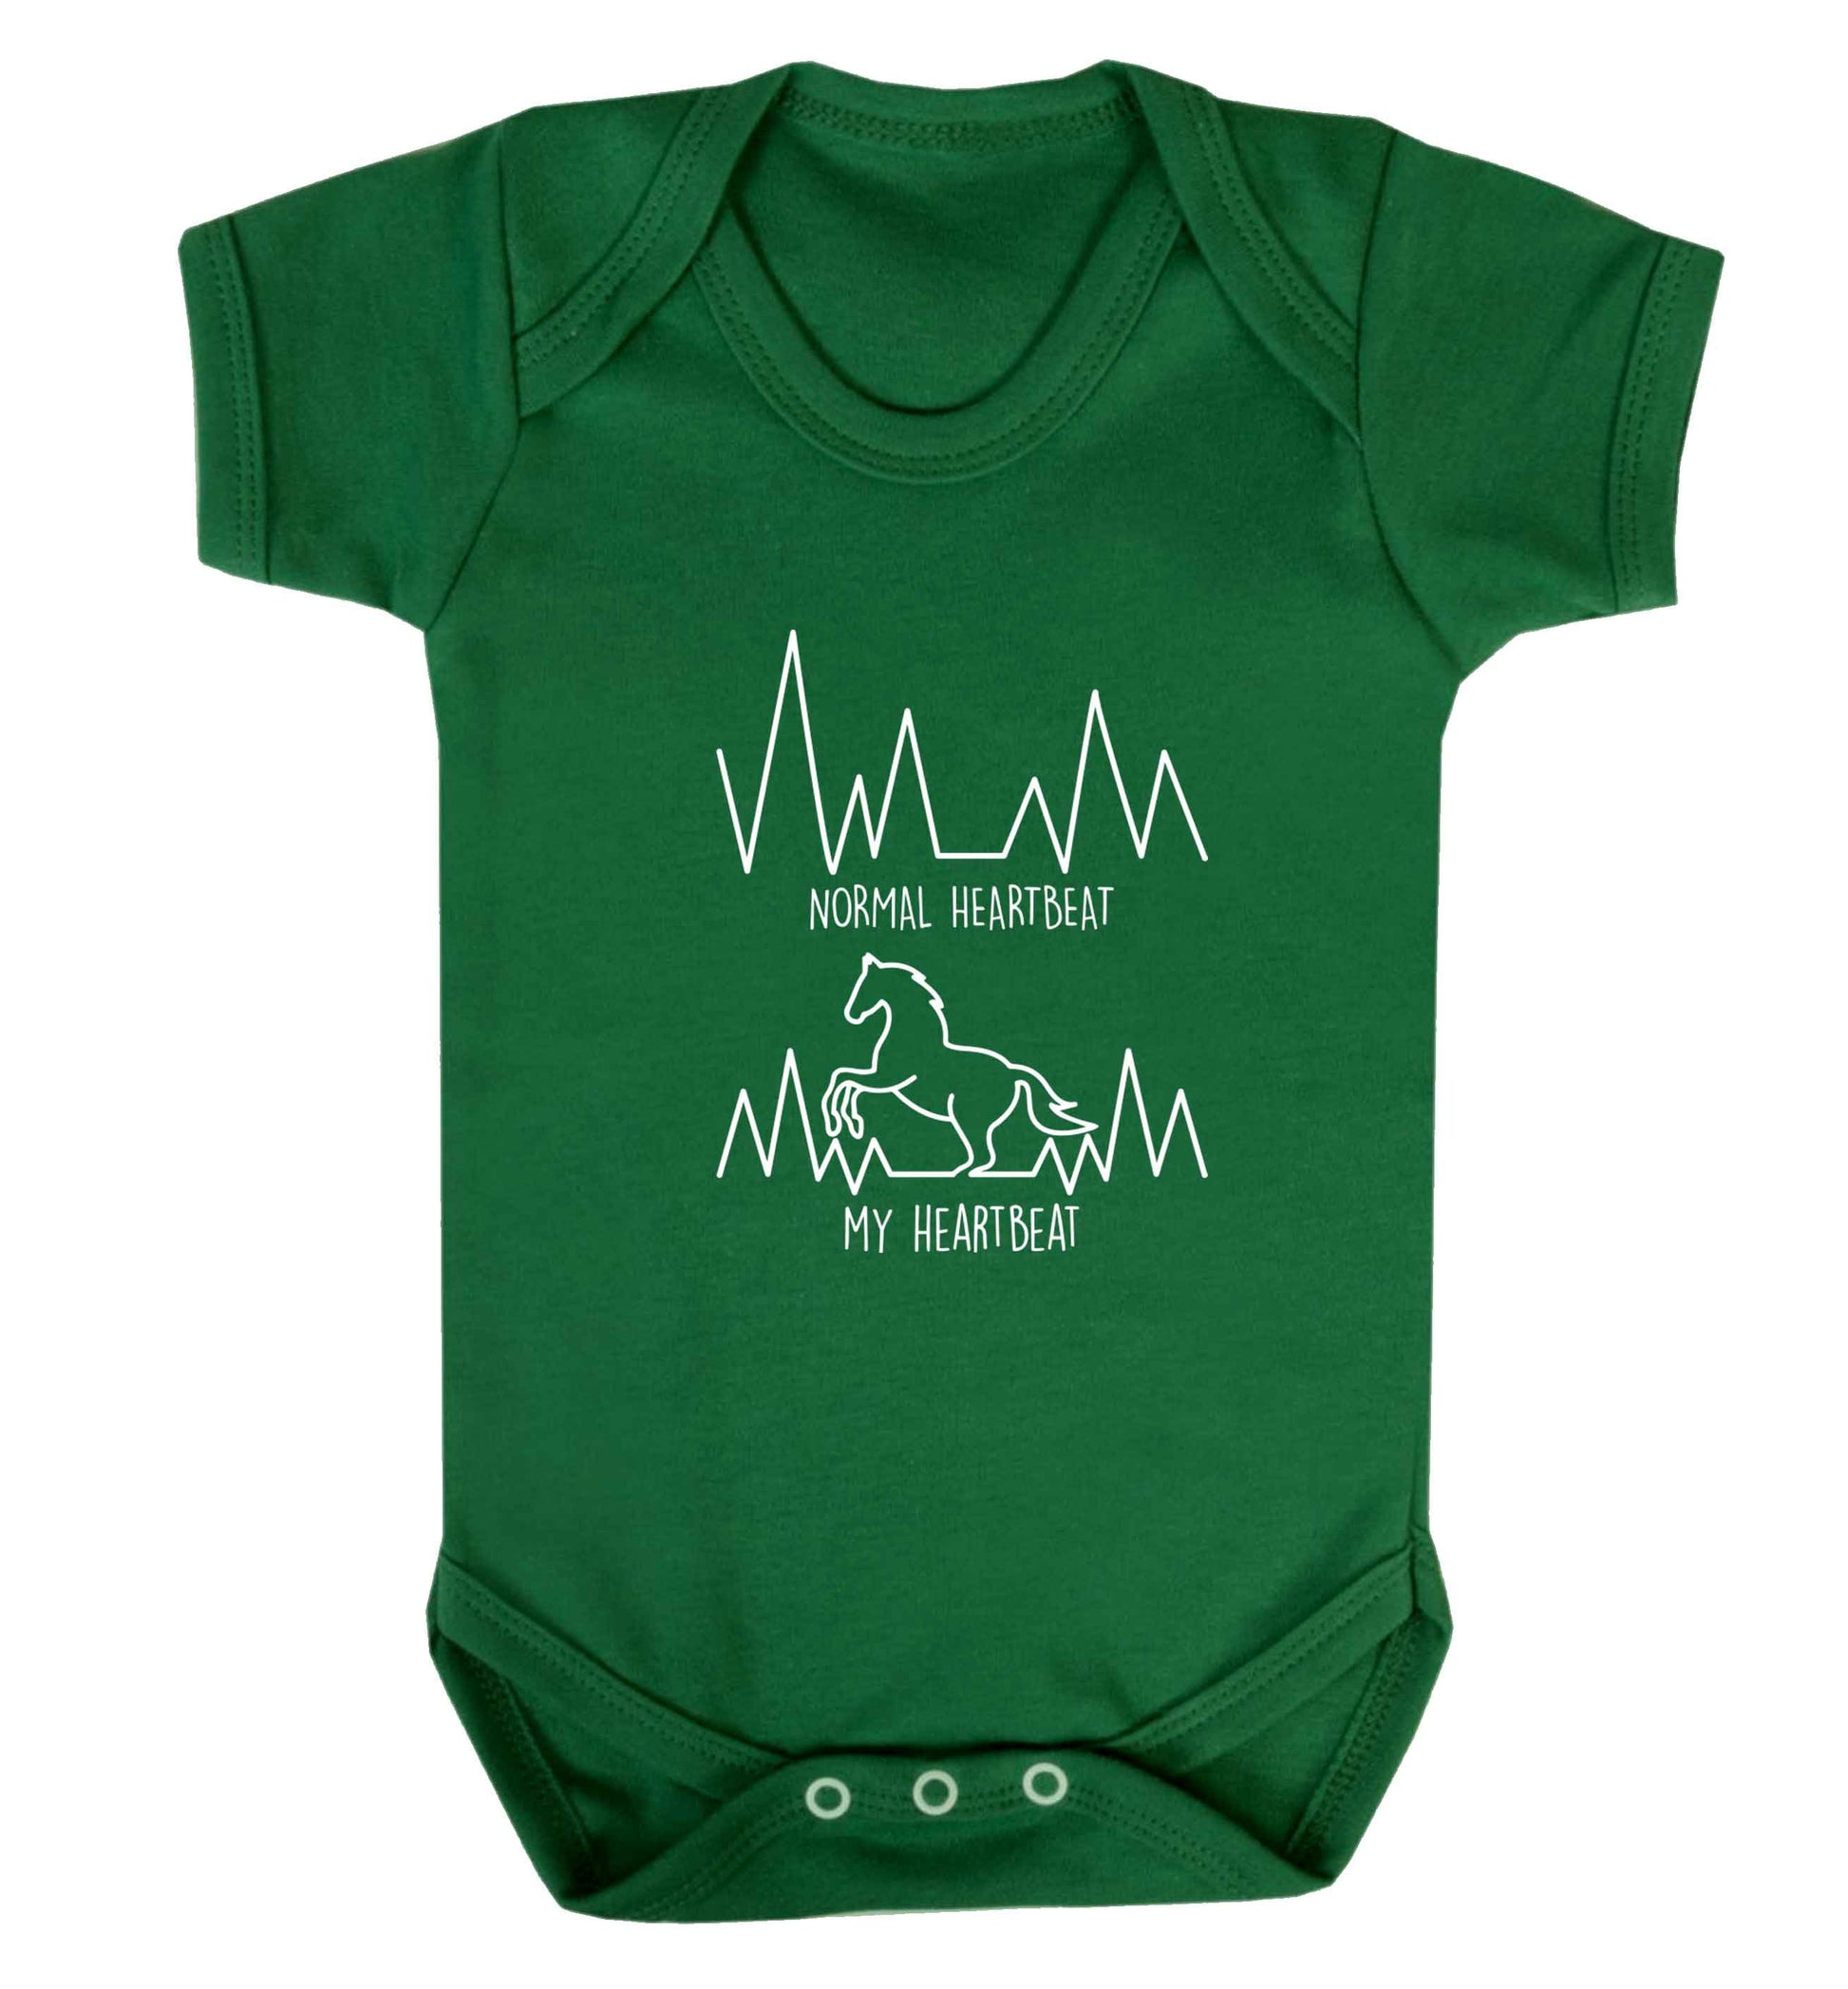 Horse - Normal heartbeat my heartbeat baby vest green 18-24 months